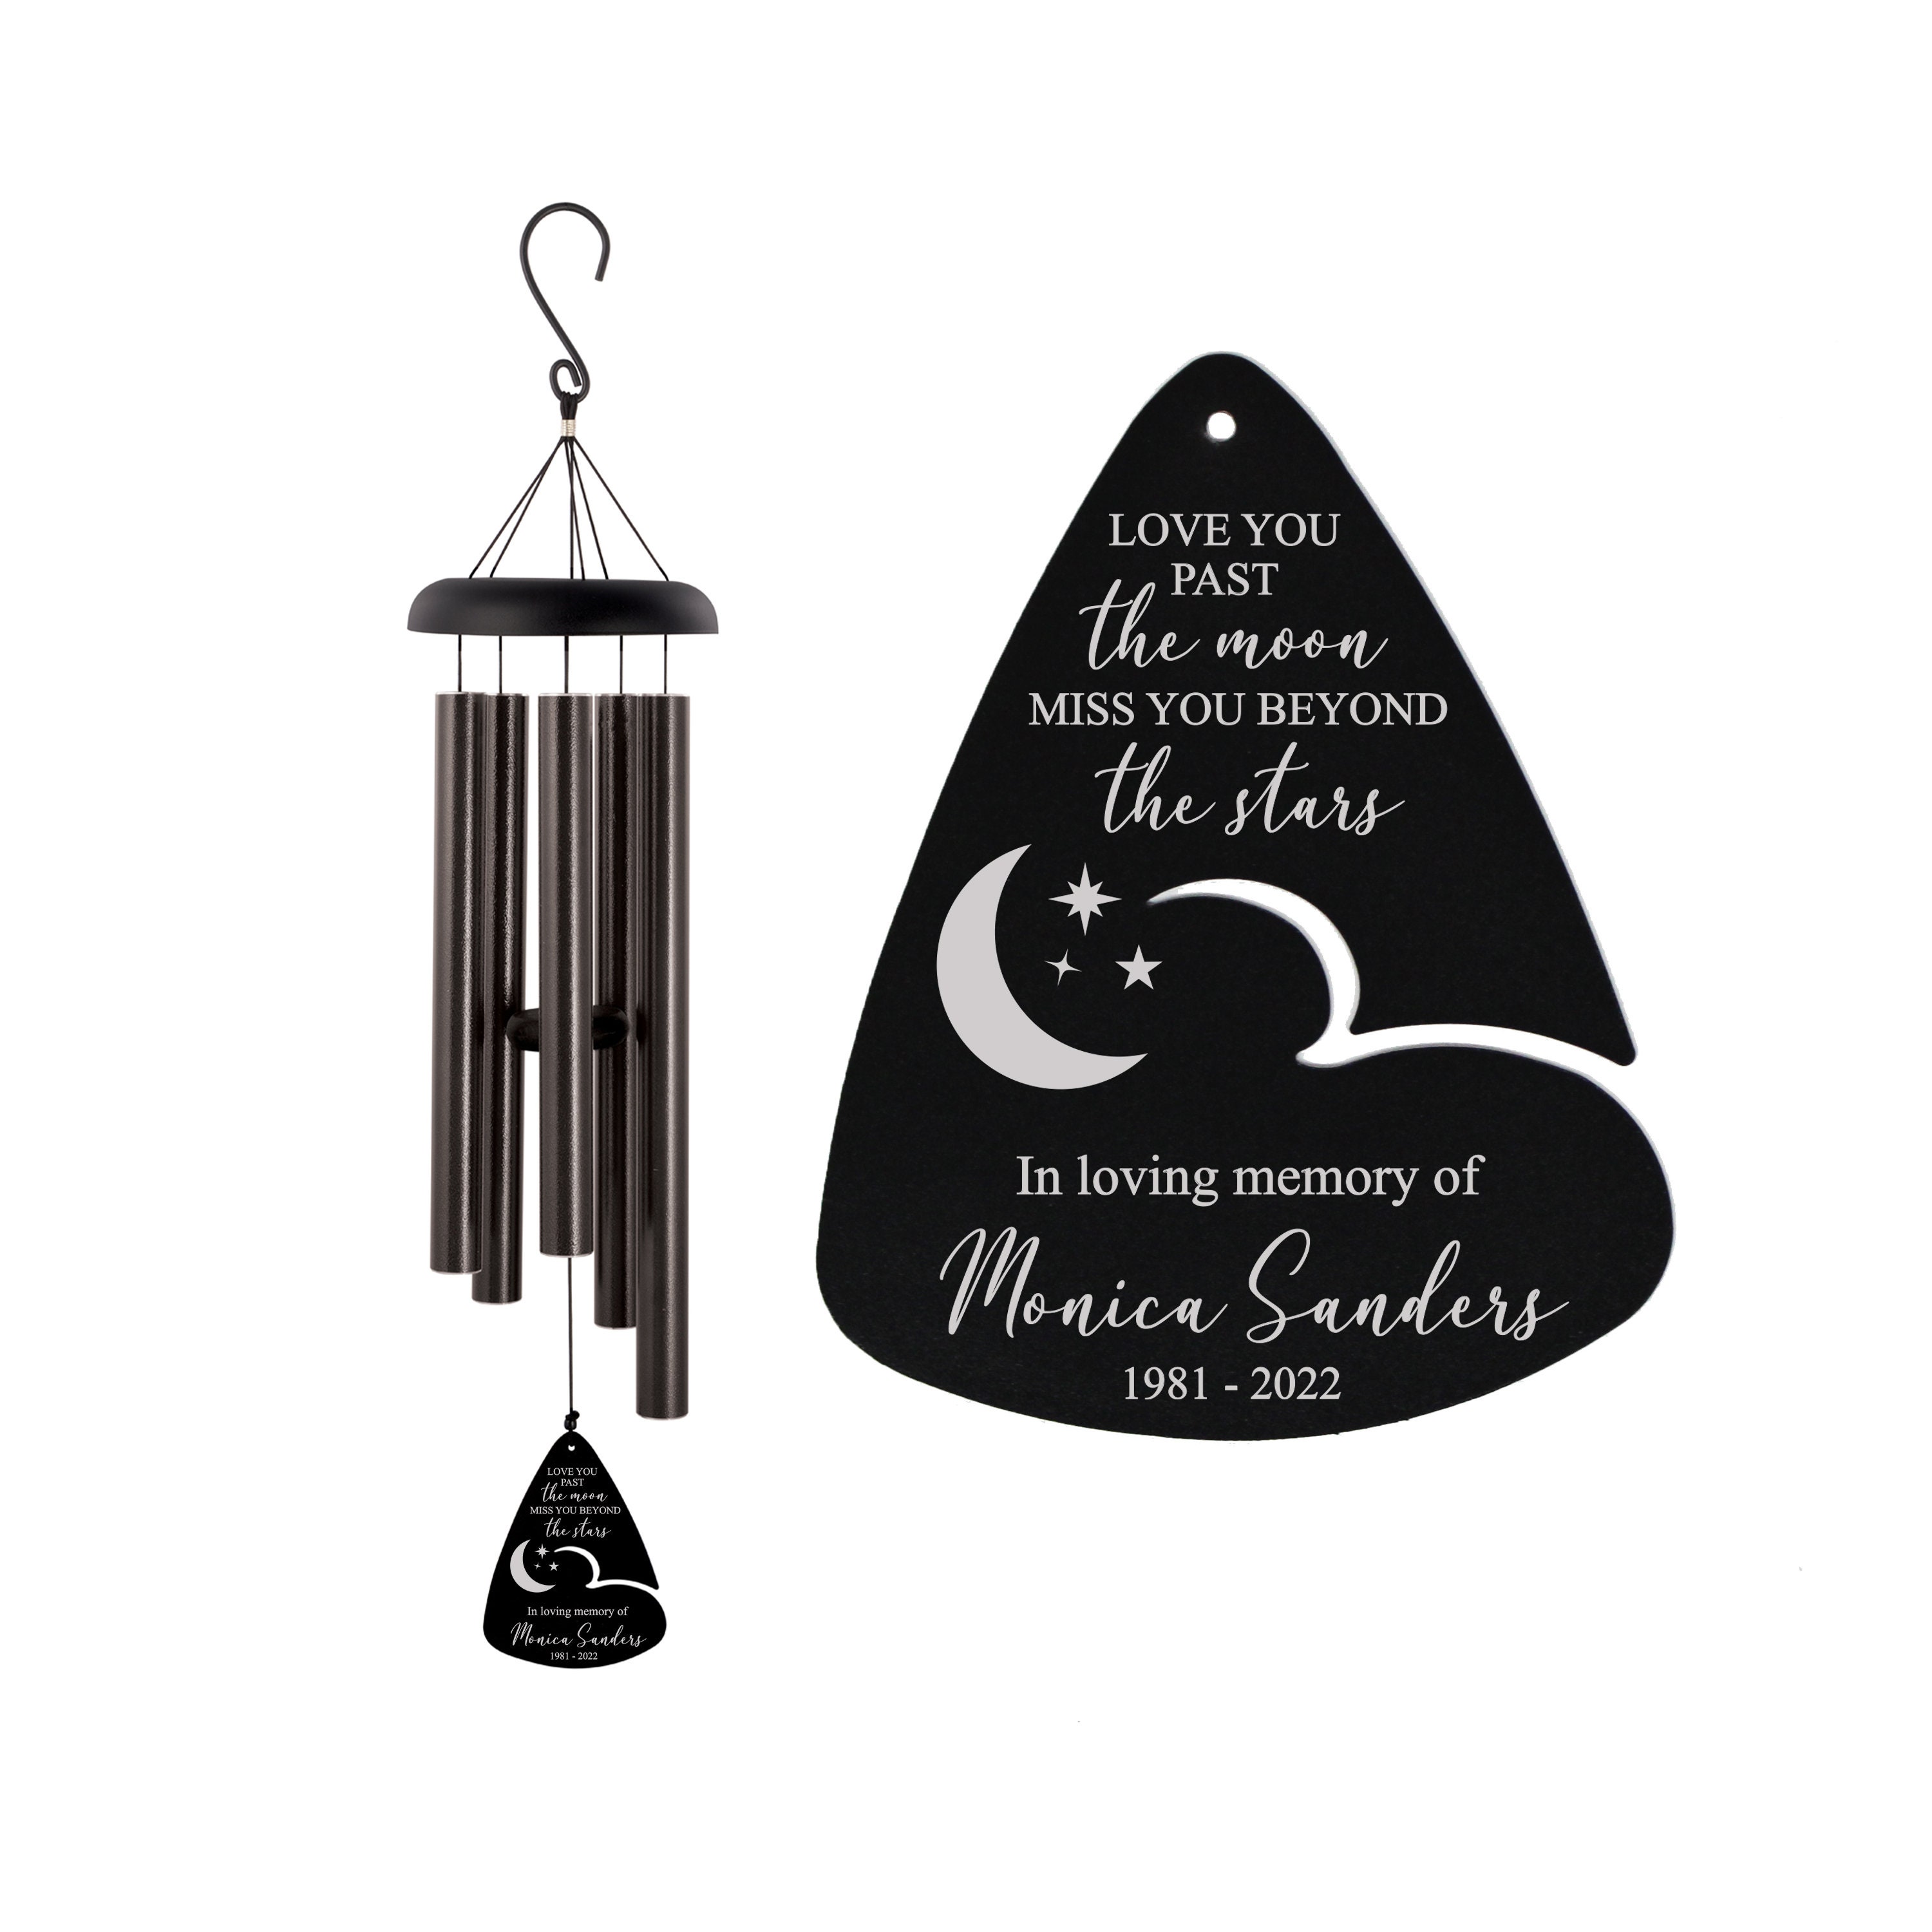 Freaky like a wind chime — Casual Moon Friend and babies MF by the  wonderful